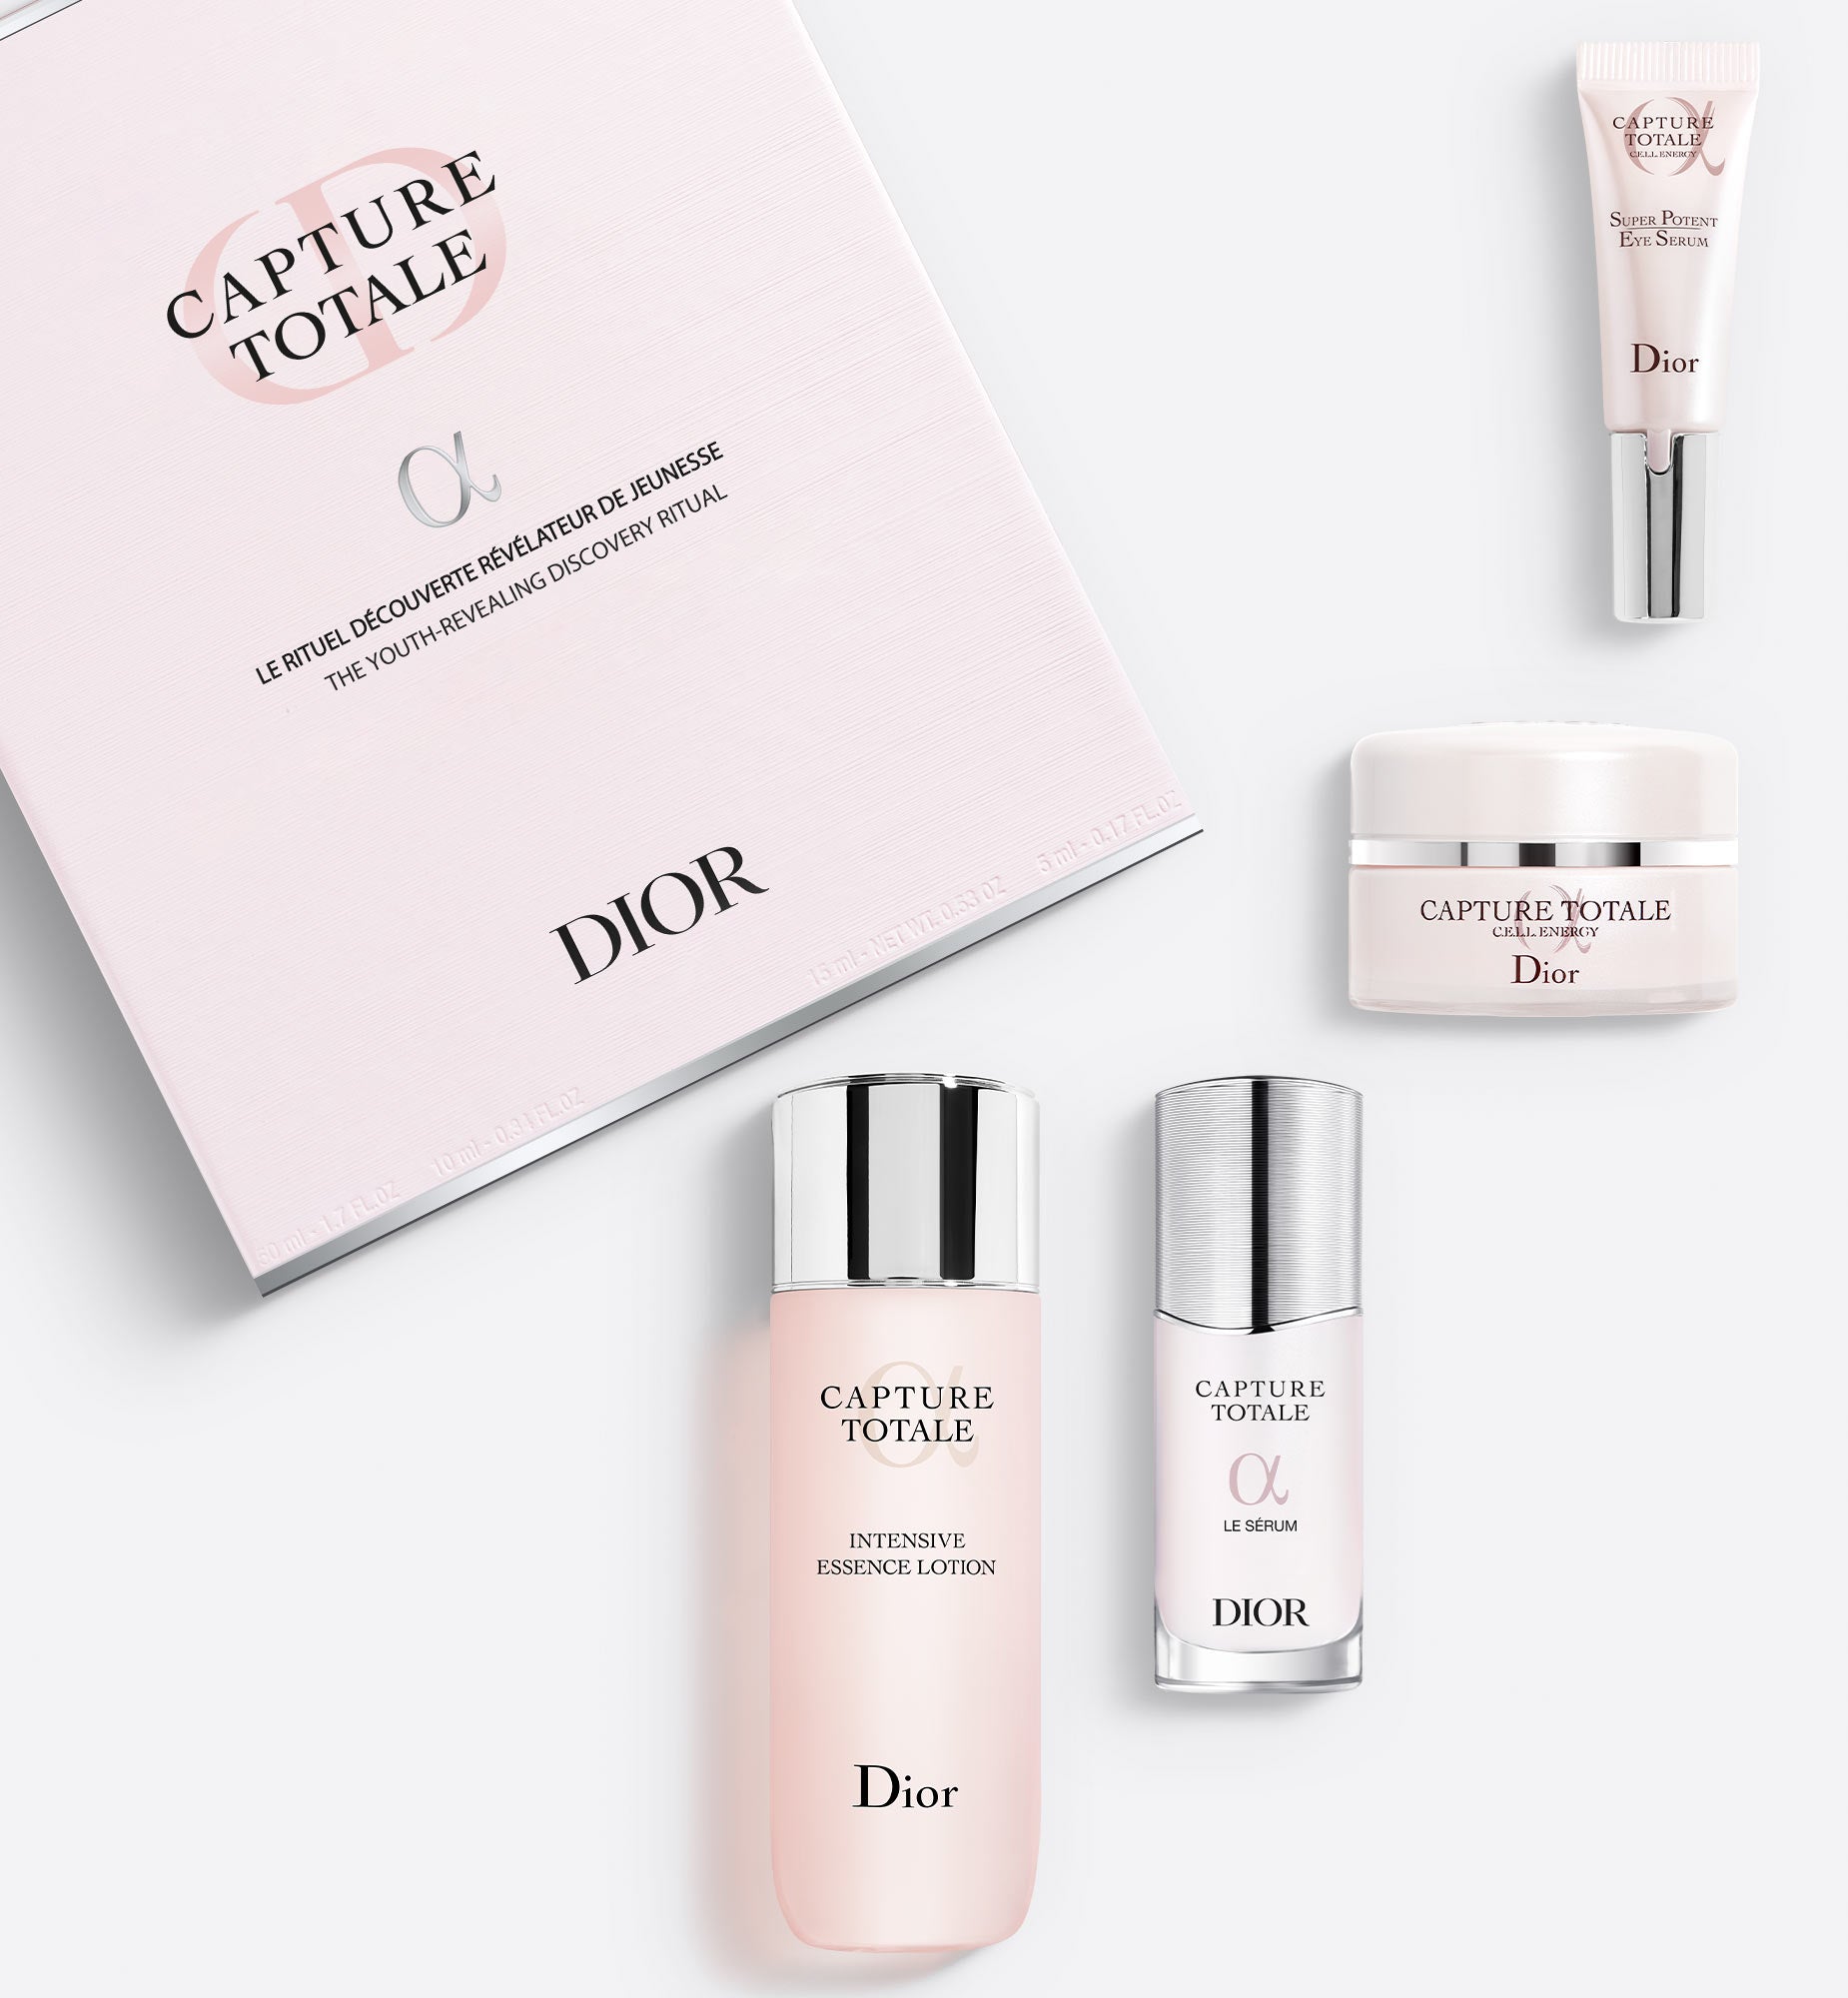 CAPTURE TOTALE——The Youth-Revealing Discovery Ritual - Selection of 4 Firming Skincare Products